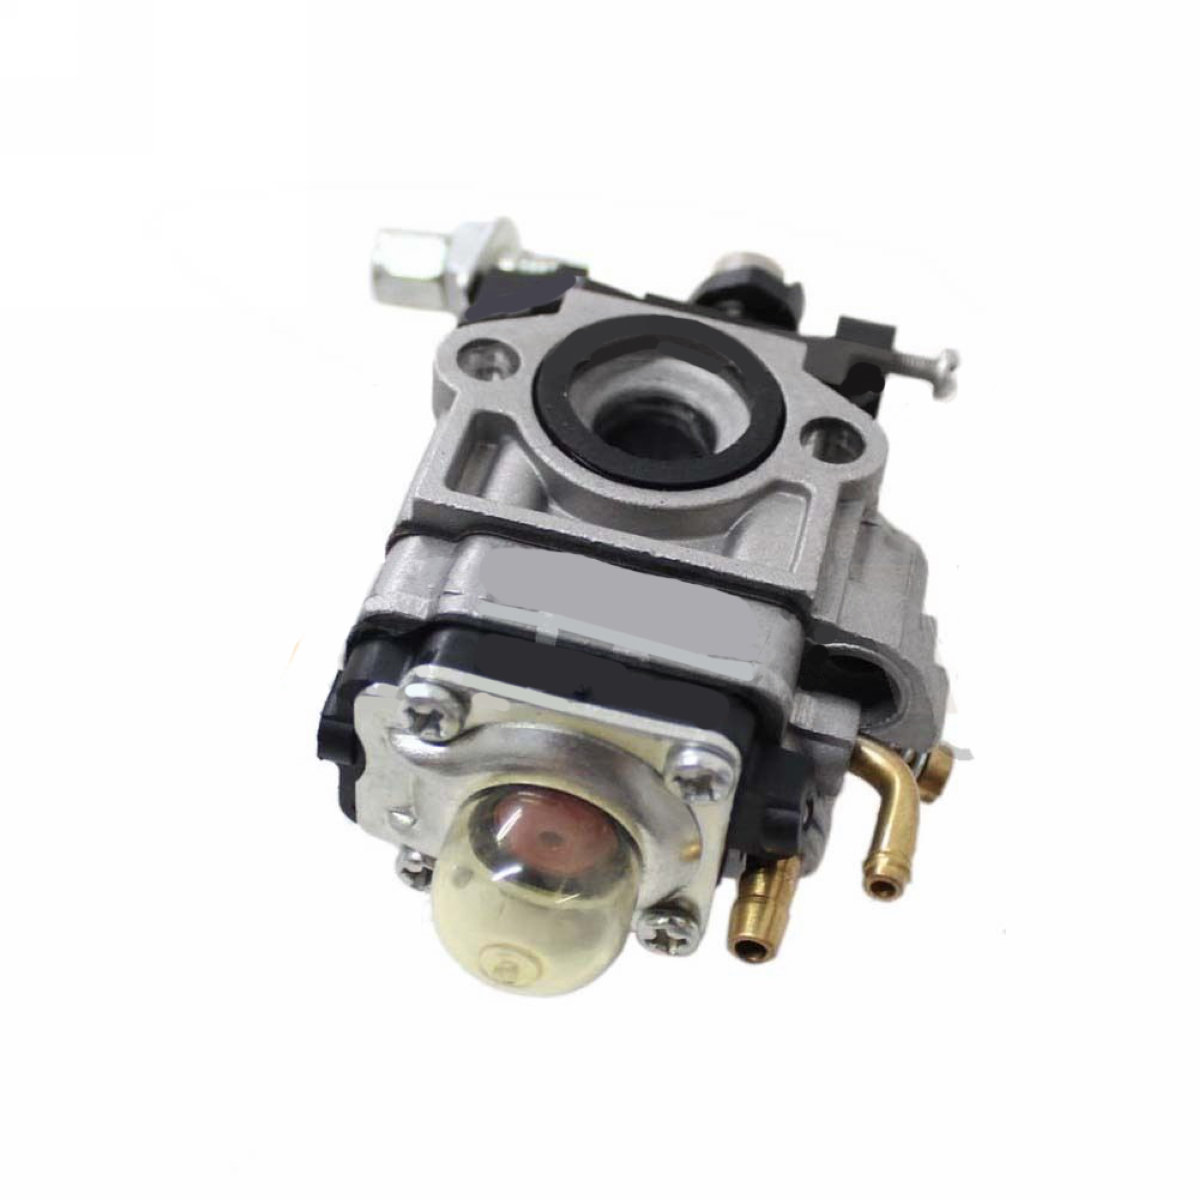 10mm Carburetor Carb for Universal Hedge Trimmer Chainsaw Strimmer Brush Cutter Parts